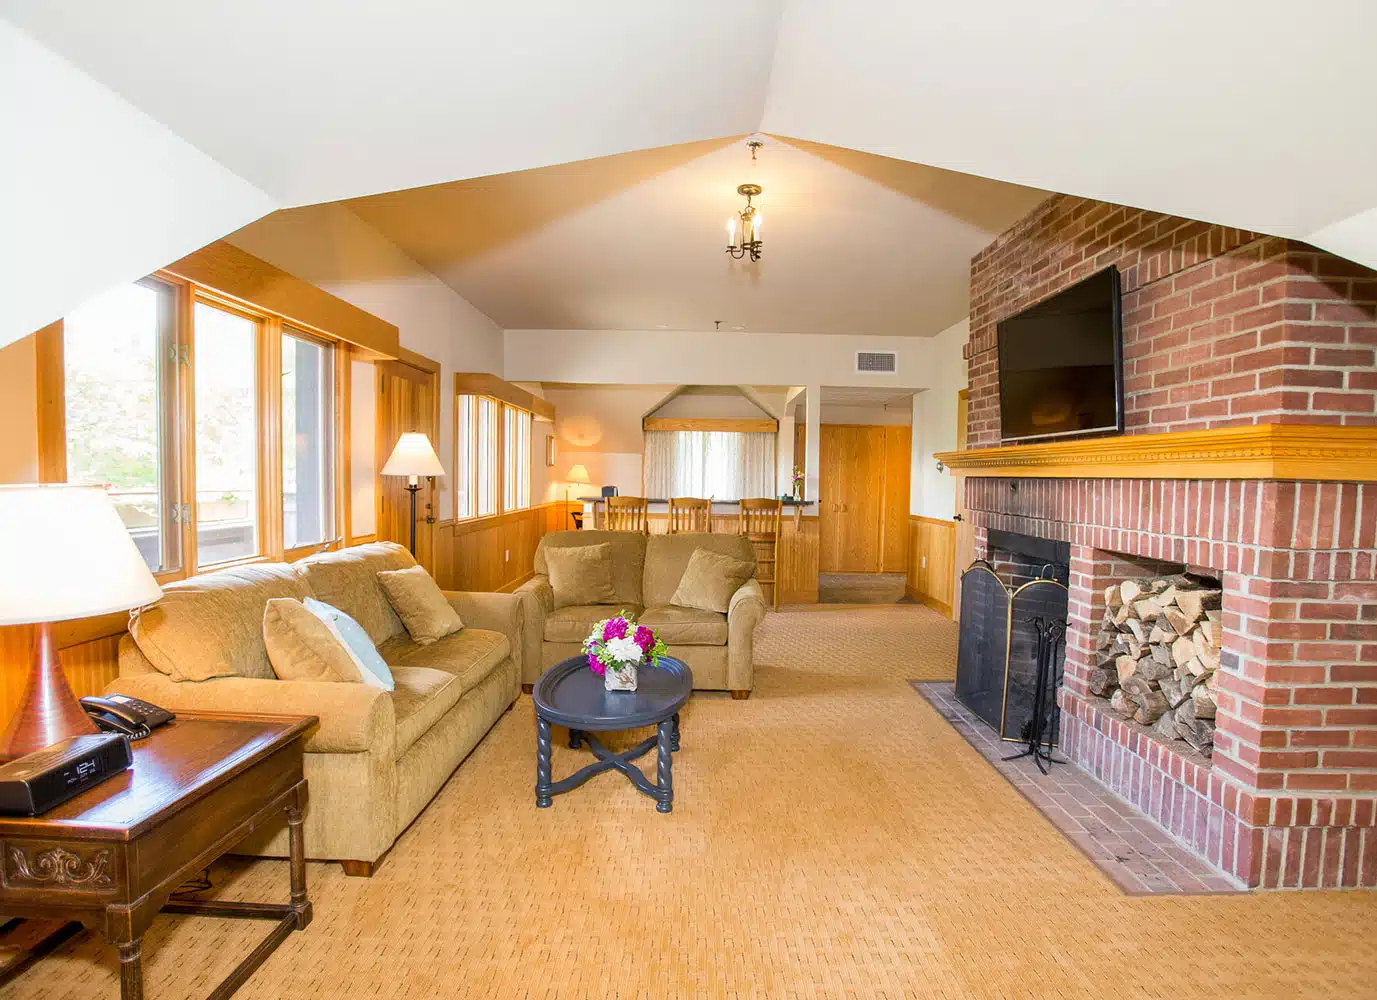 Living area at Trapp Family Lodge.